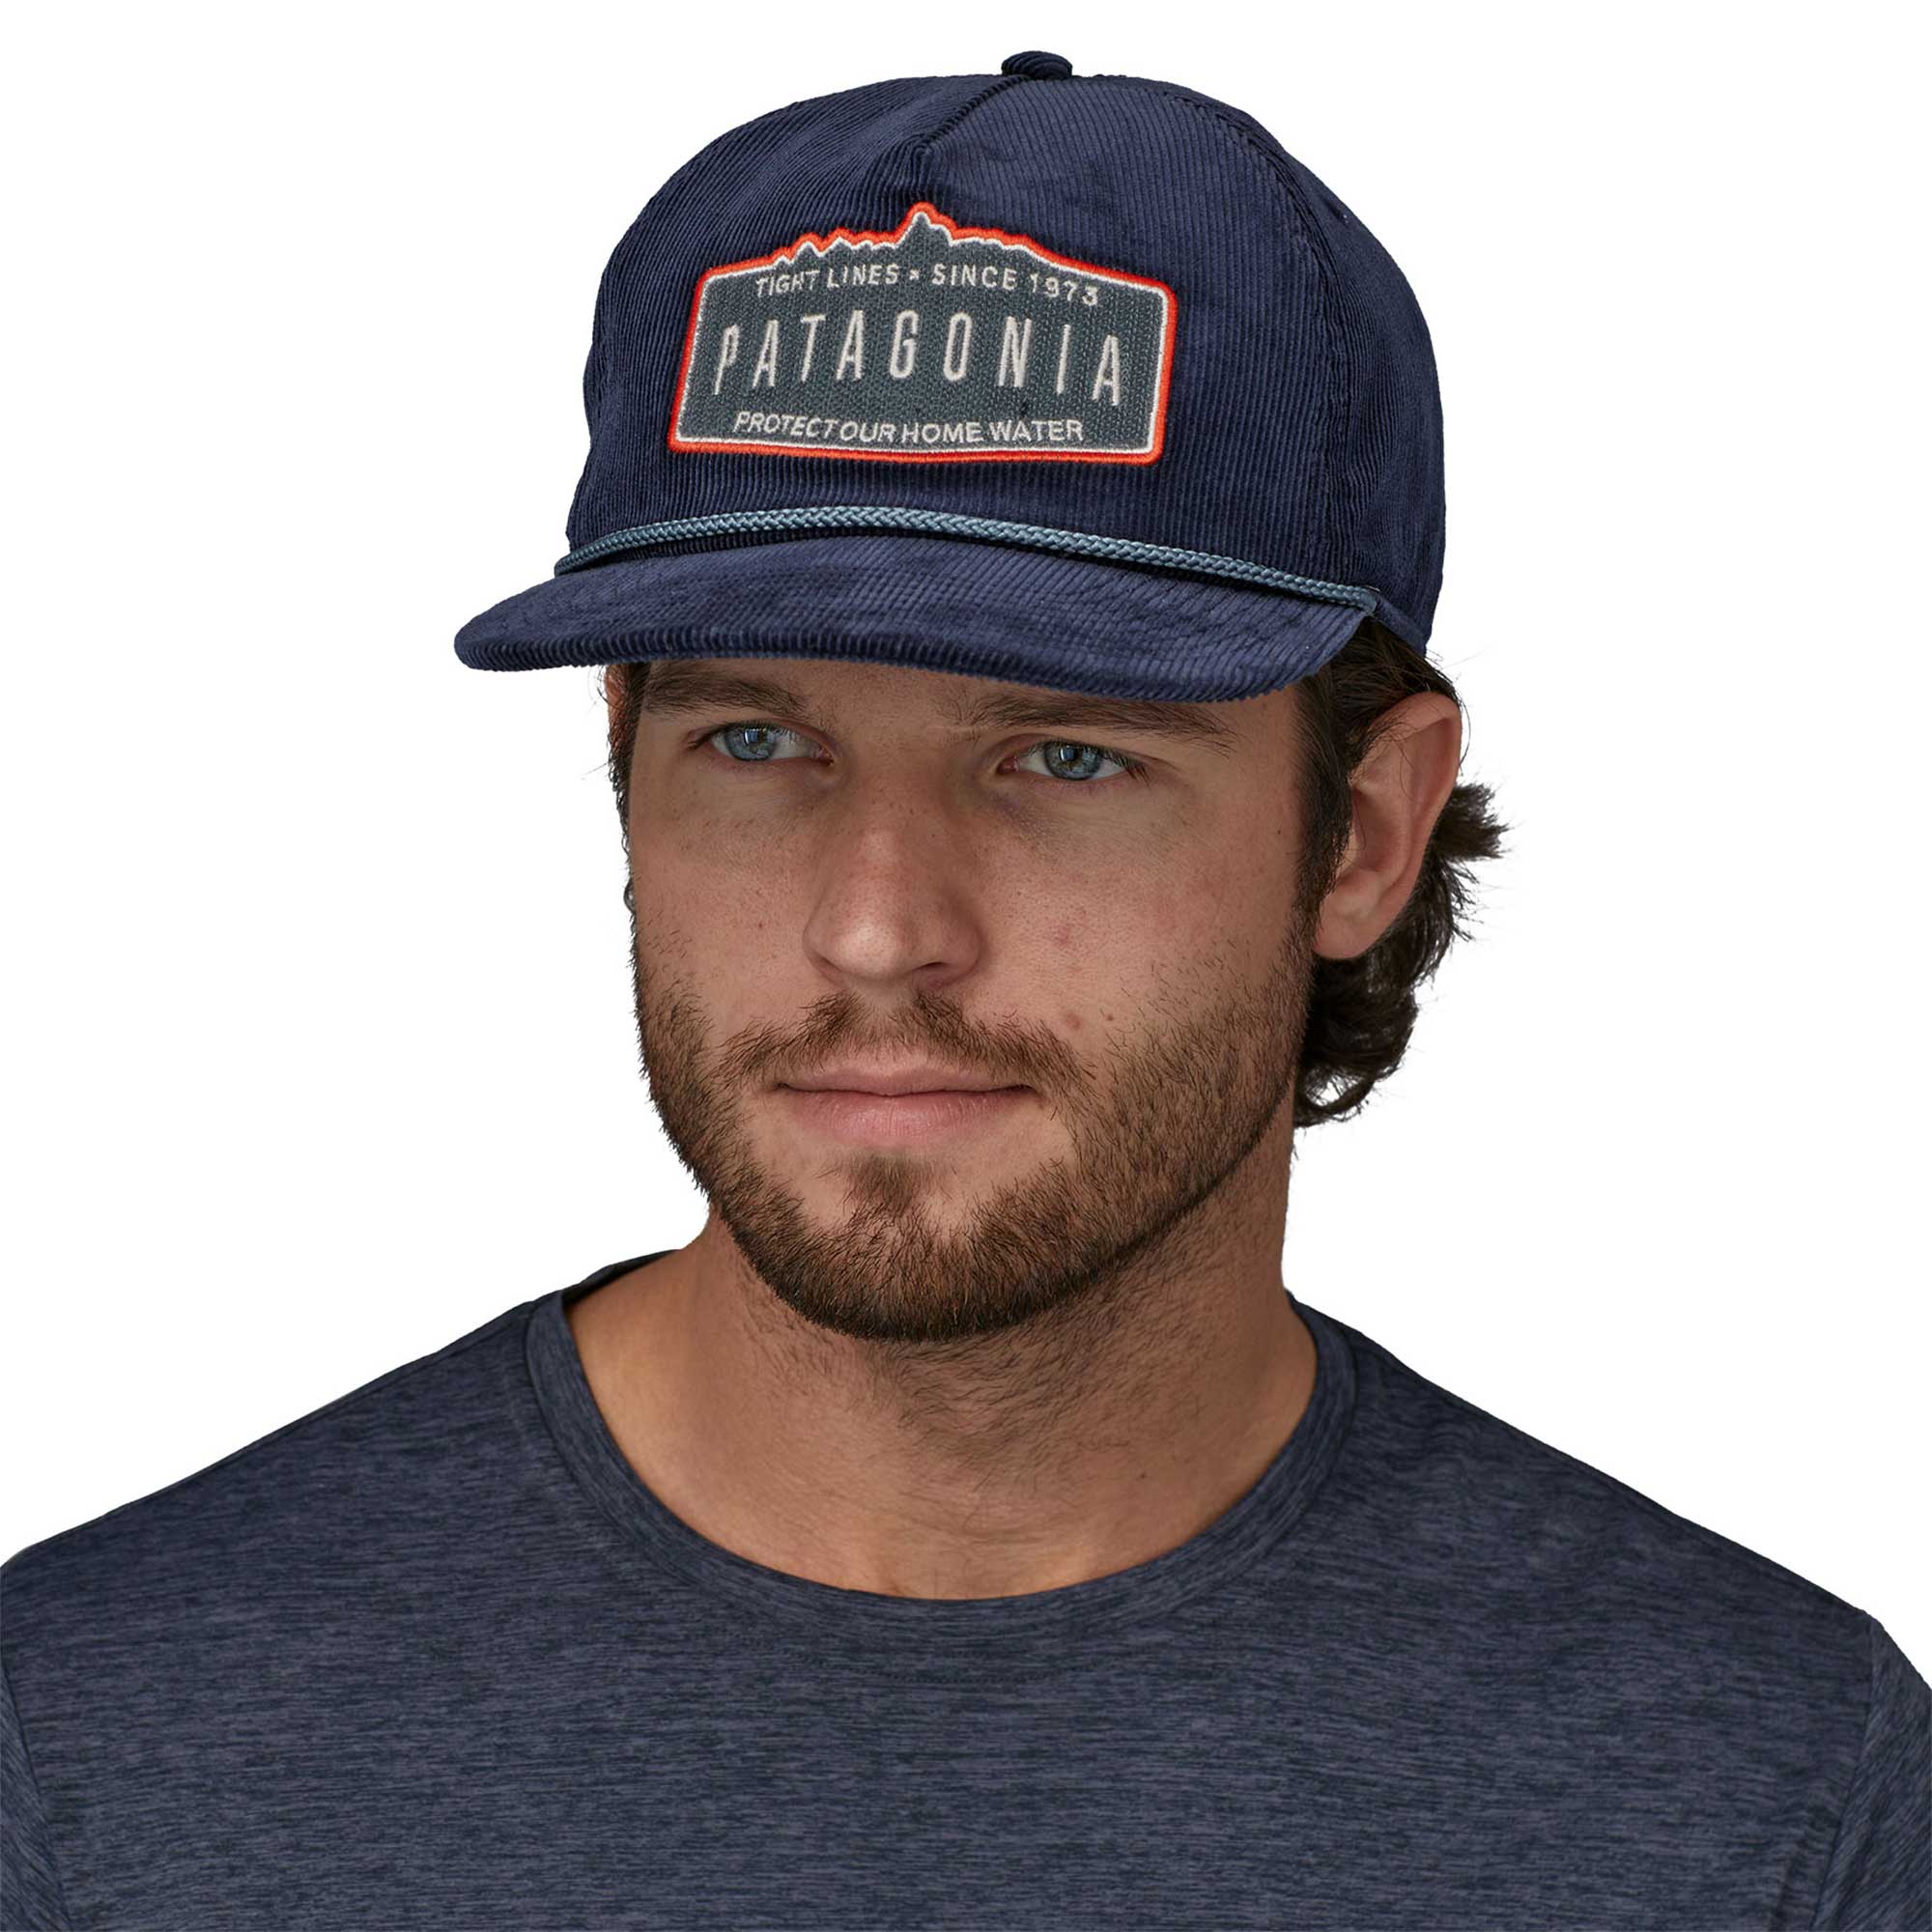 PATAGONIA Fly Catcher Hat New With Tags - Tombstone: New Navy 